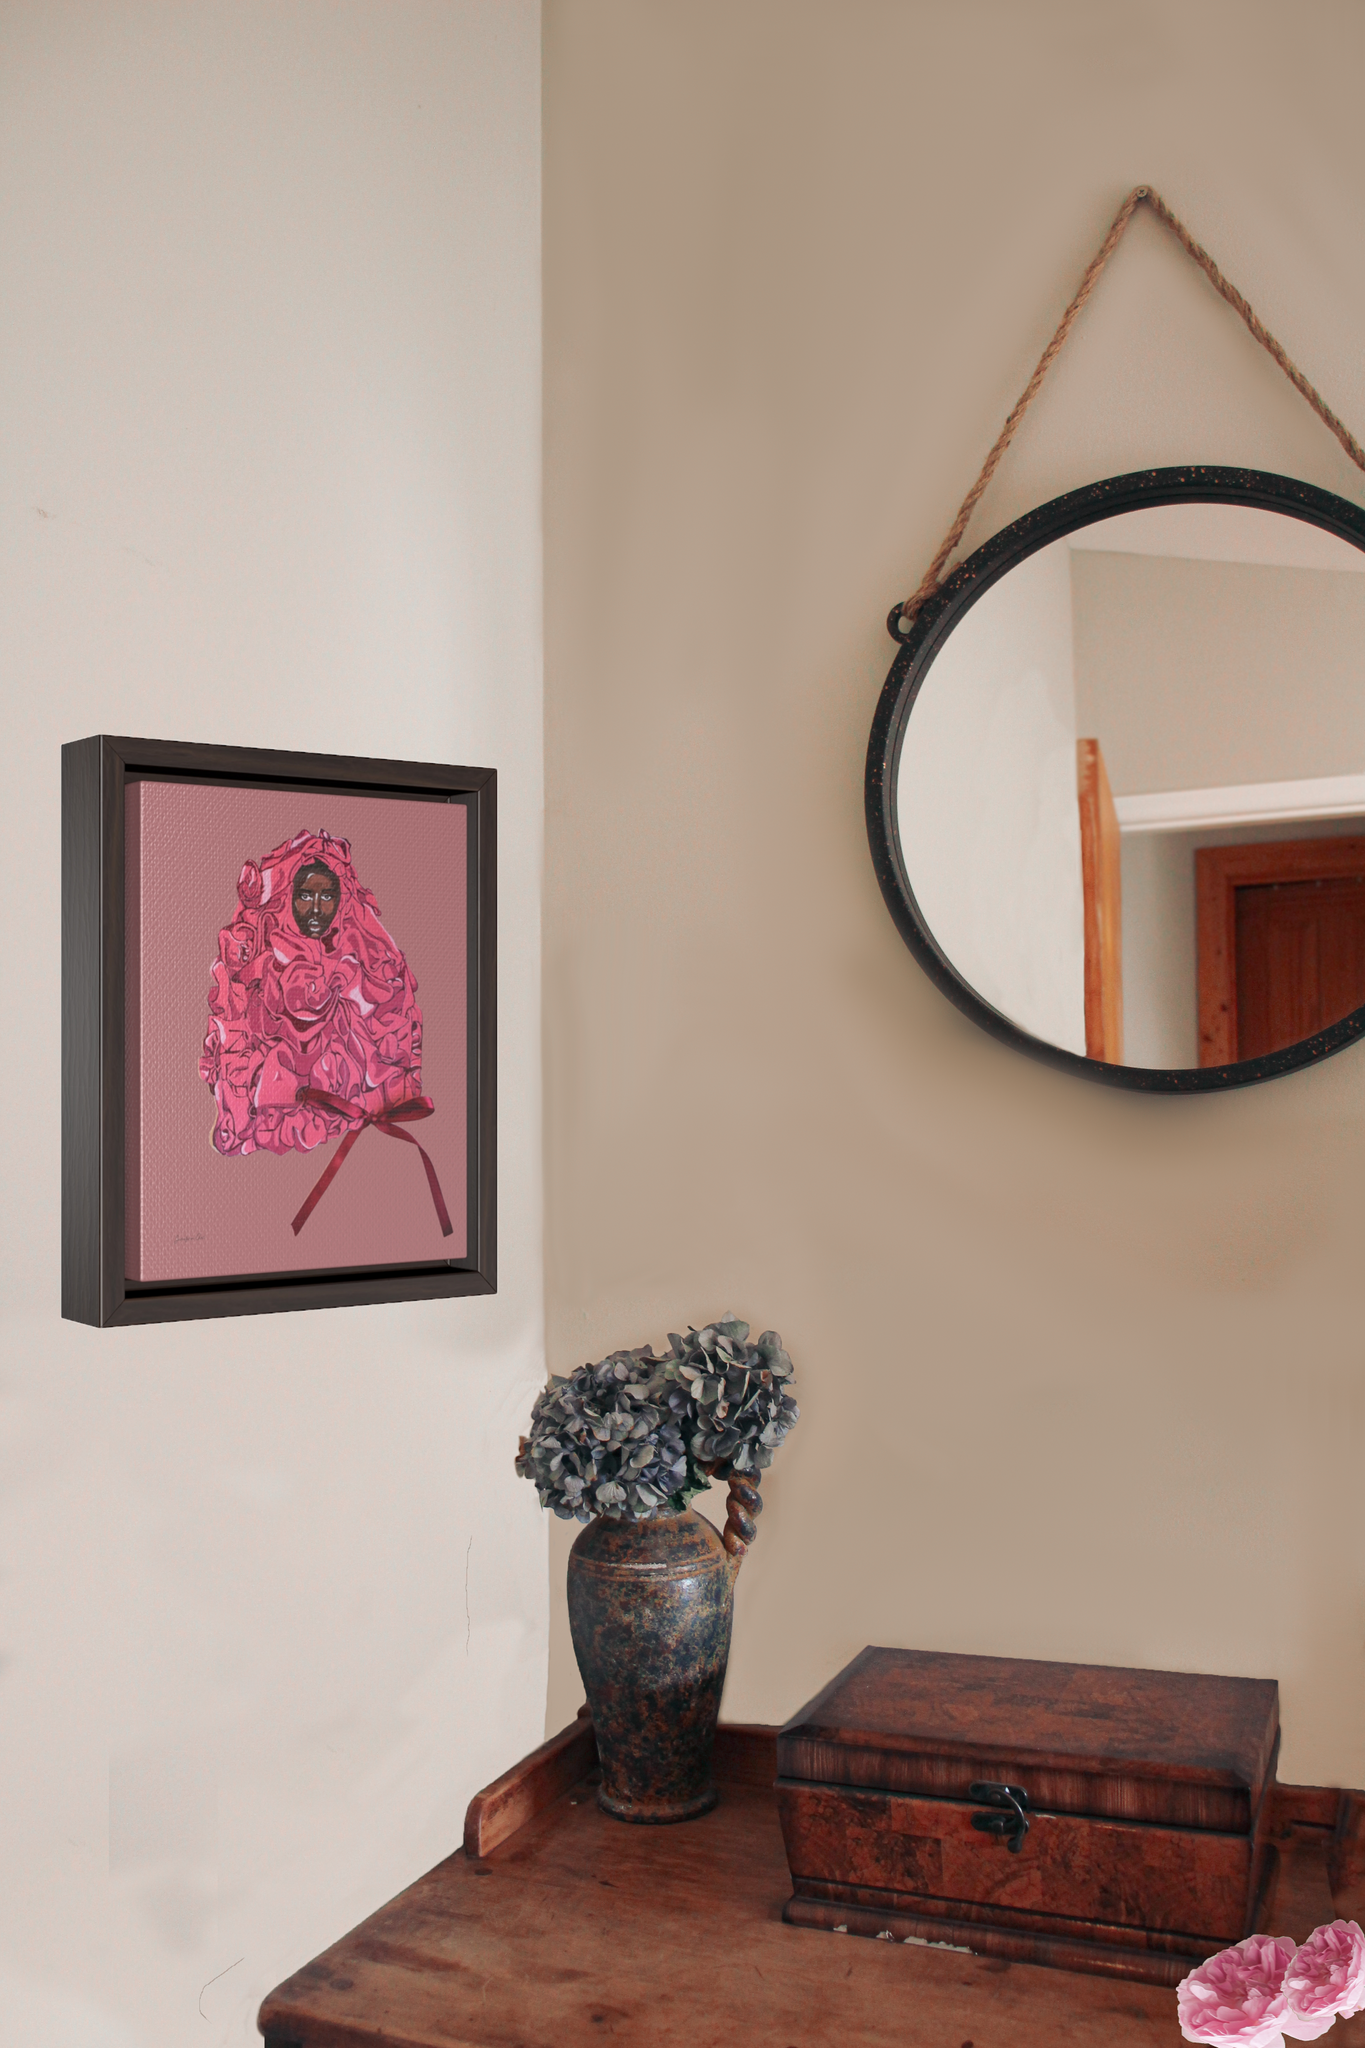 A framed gallery wrap canvas, with an illustration of model Adut Akech wearing a pink Valentino gown with a bow, with a pink background, hanging on a wall next to a desk with a vase of flowers and a jewelry box